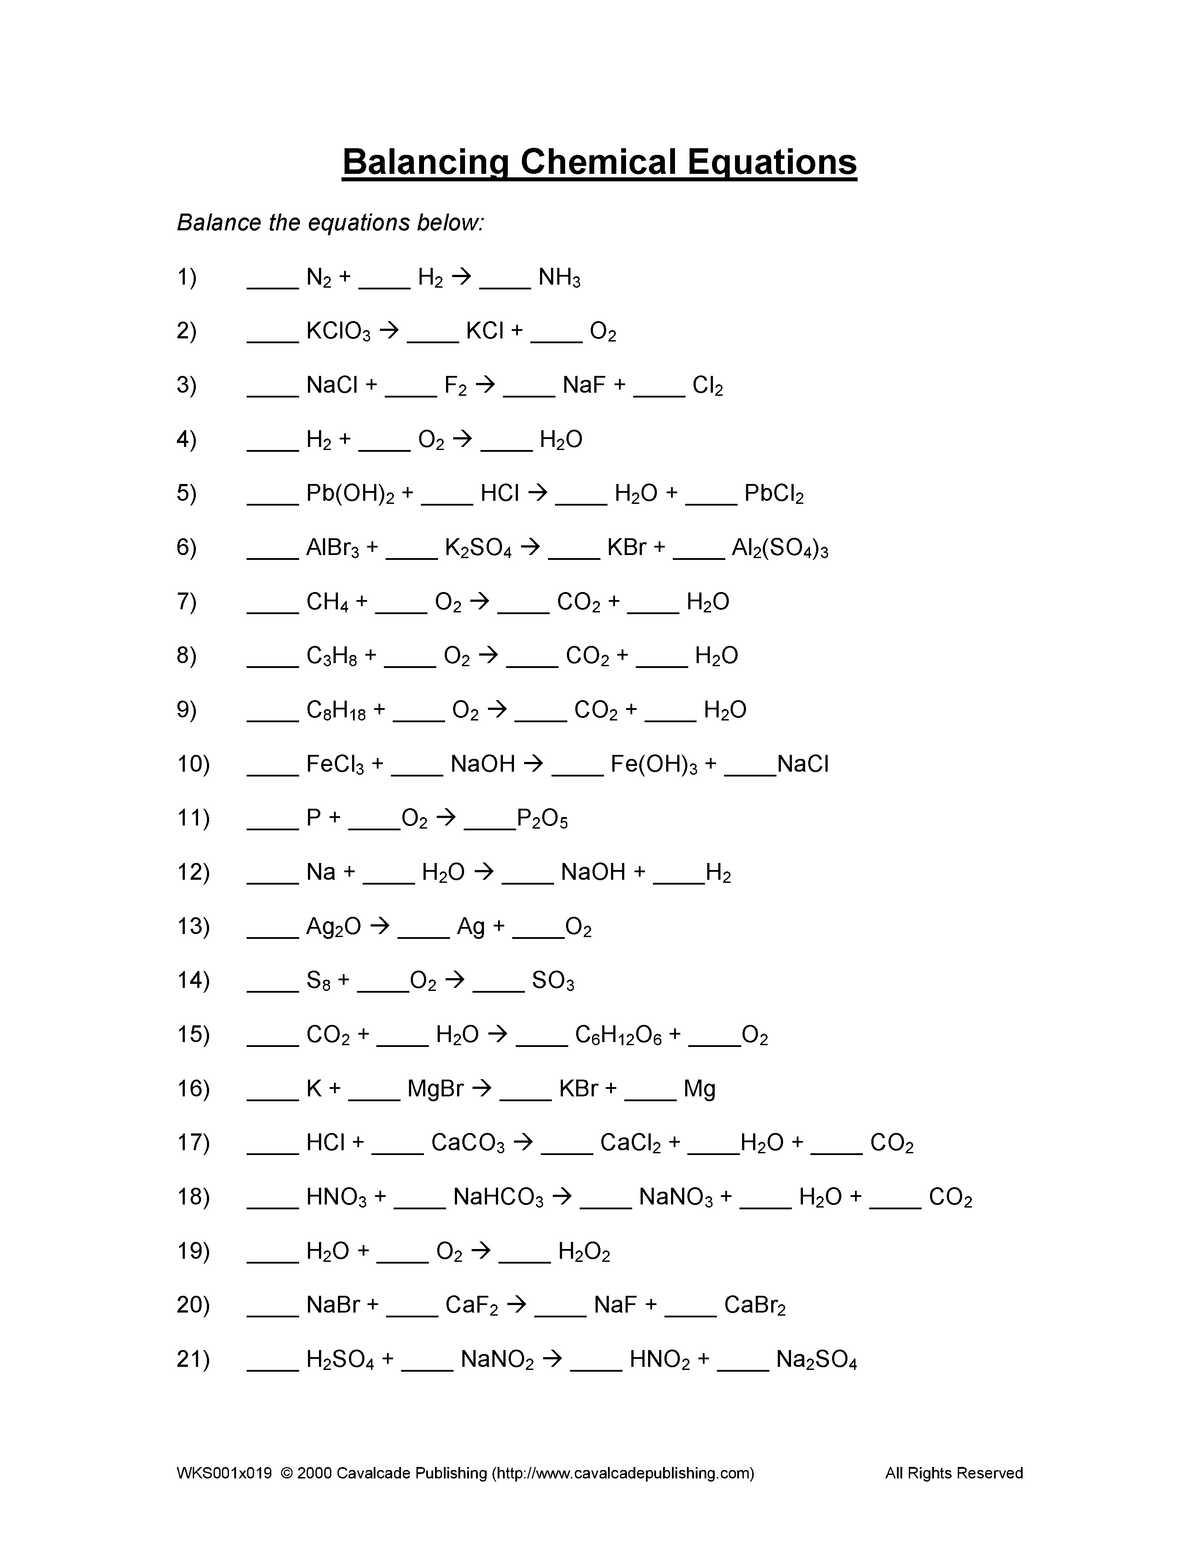 Balancing Equations Practice Worksheet Chemistry - CHEM 11 - StuDocu Throughout Balancing Equations Worksheet Answers